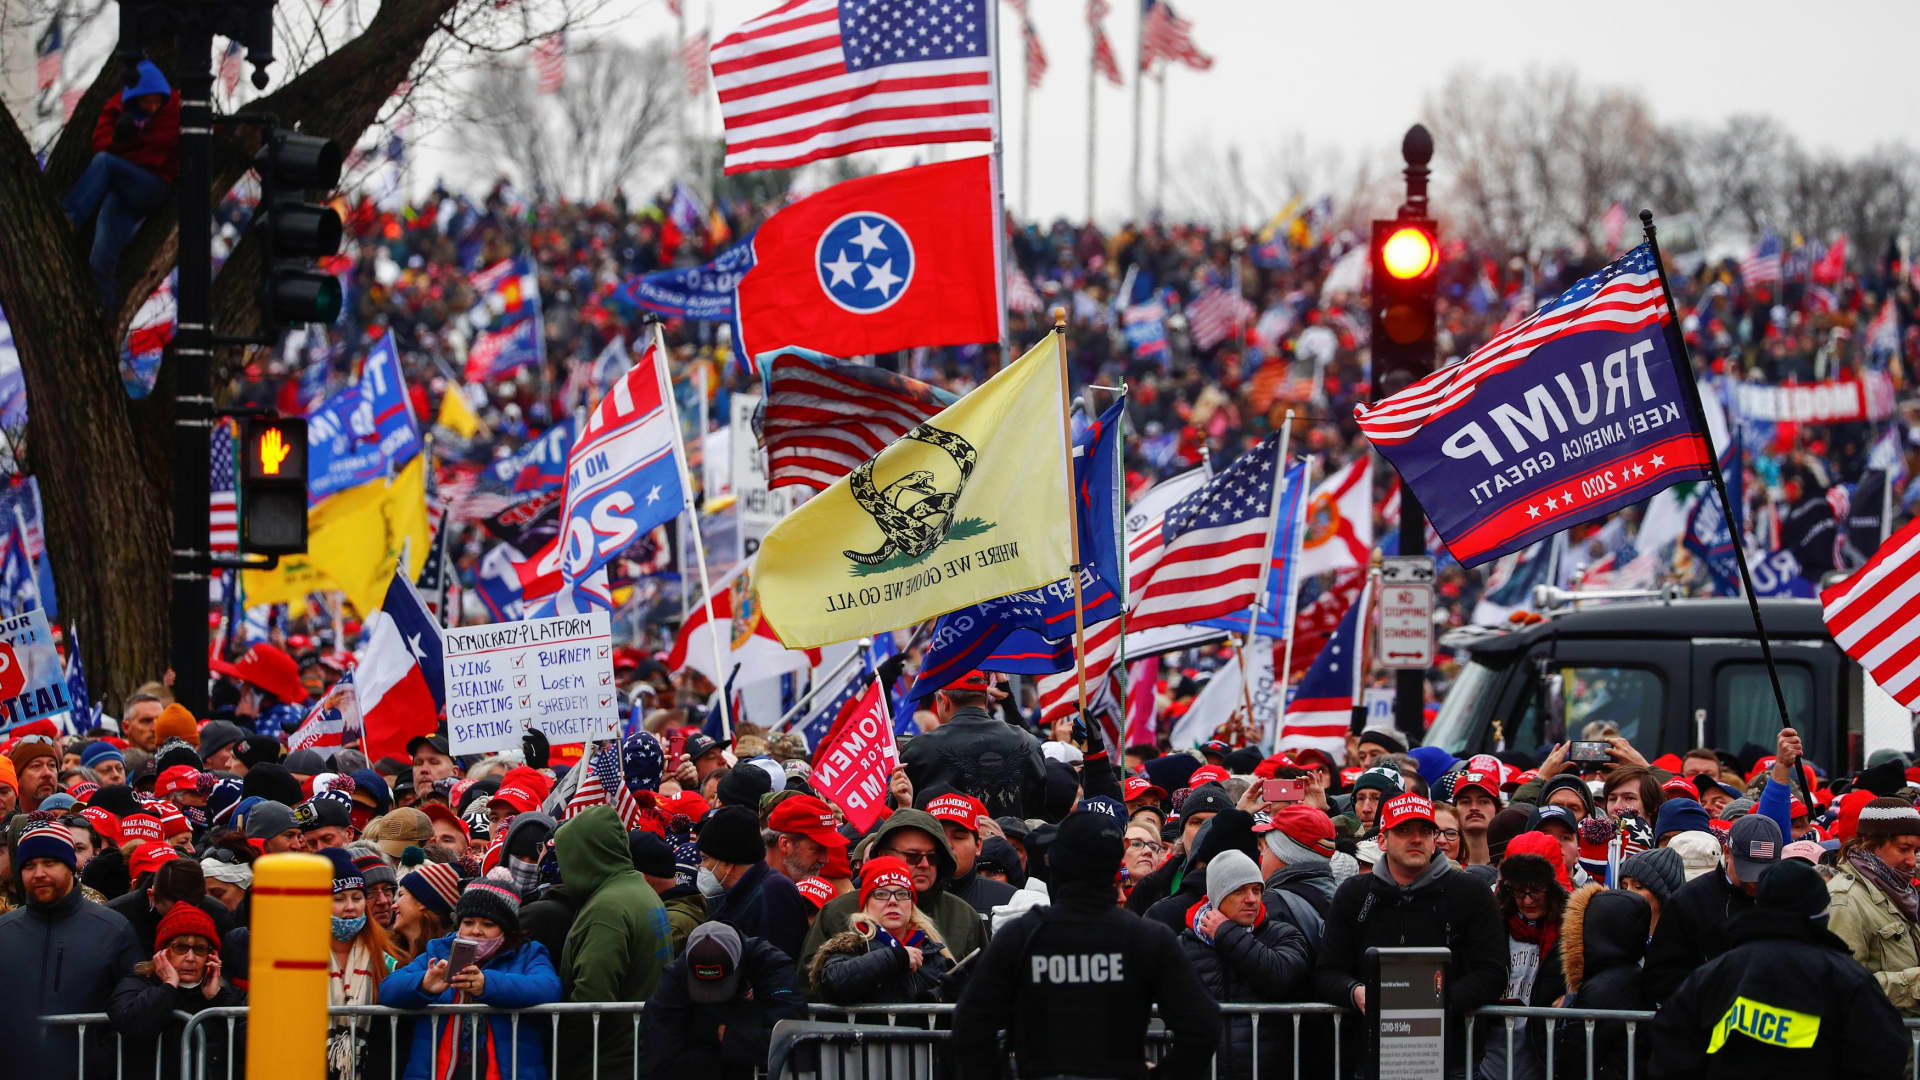 Supporters of U.S. President Donald Trump gather in Presidents Park on the Ellipse by the White House for his rally and speech to contest the certification by the U.S. Congress of the results of the 2020 U.S. presidential election in Washington, U.S, January 6, 2021.